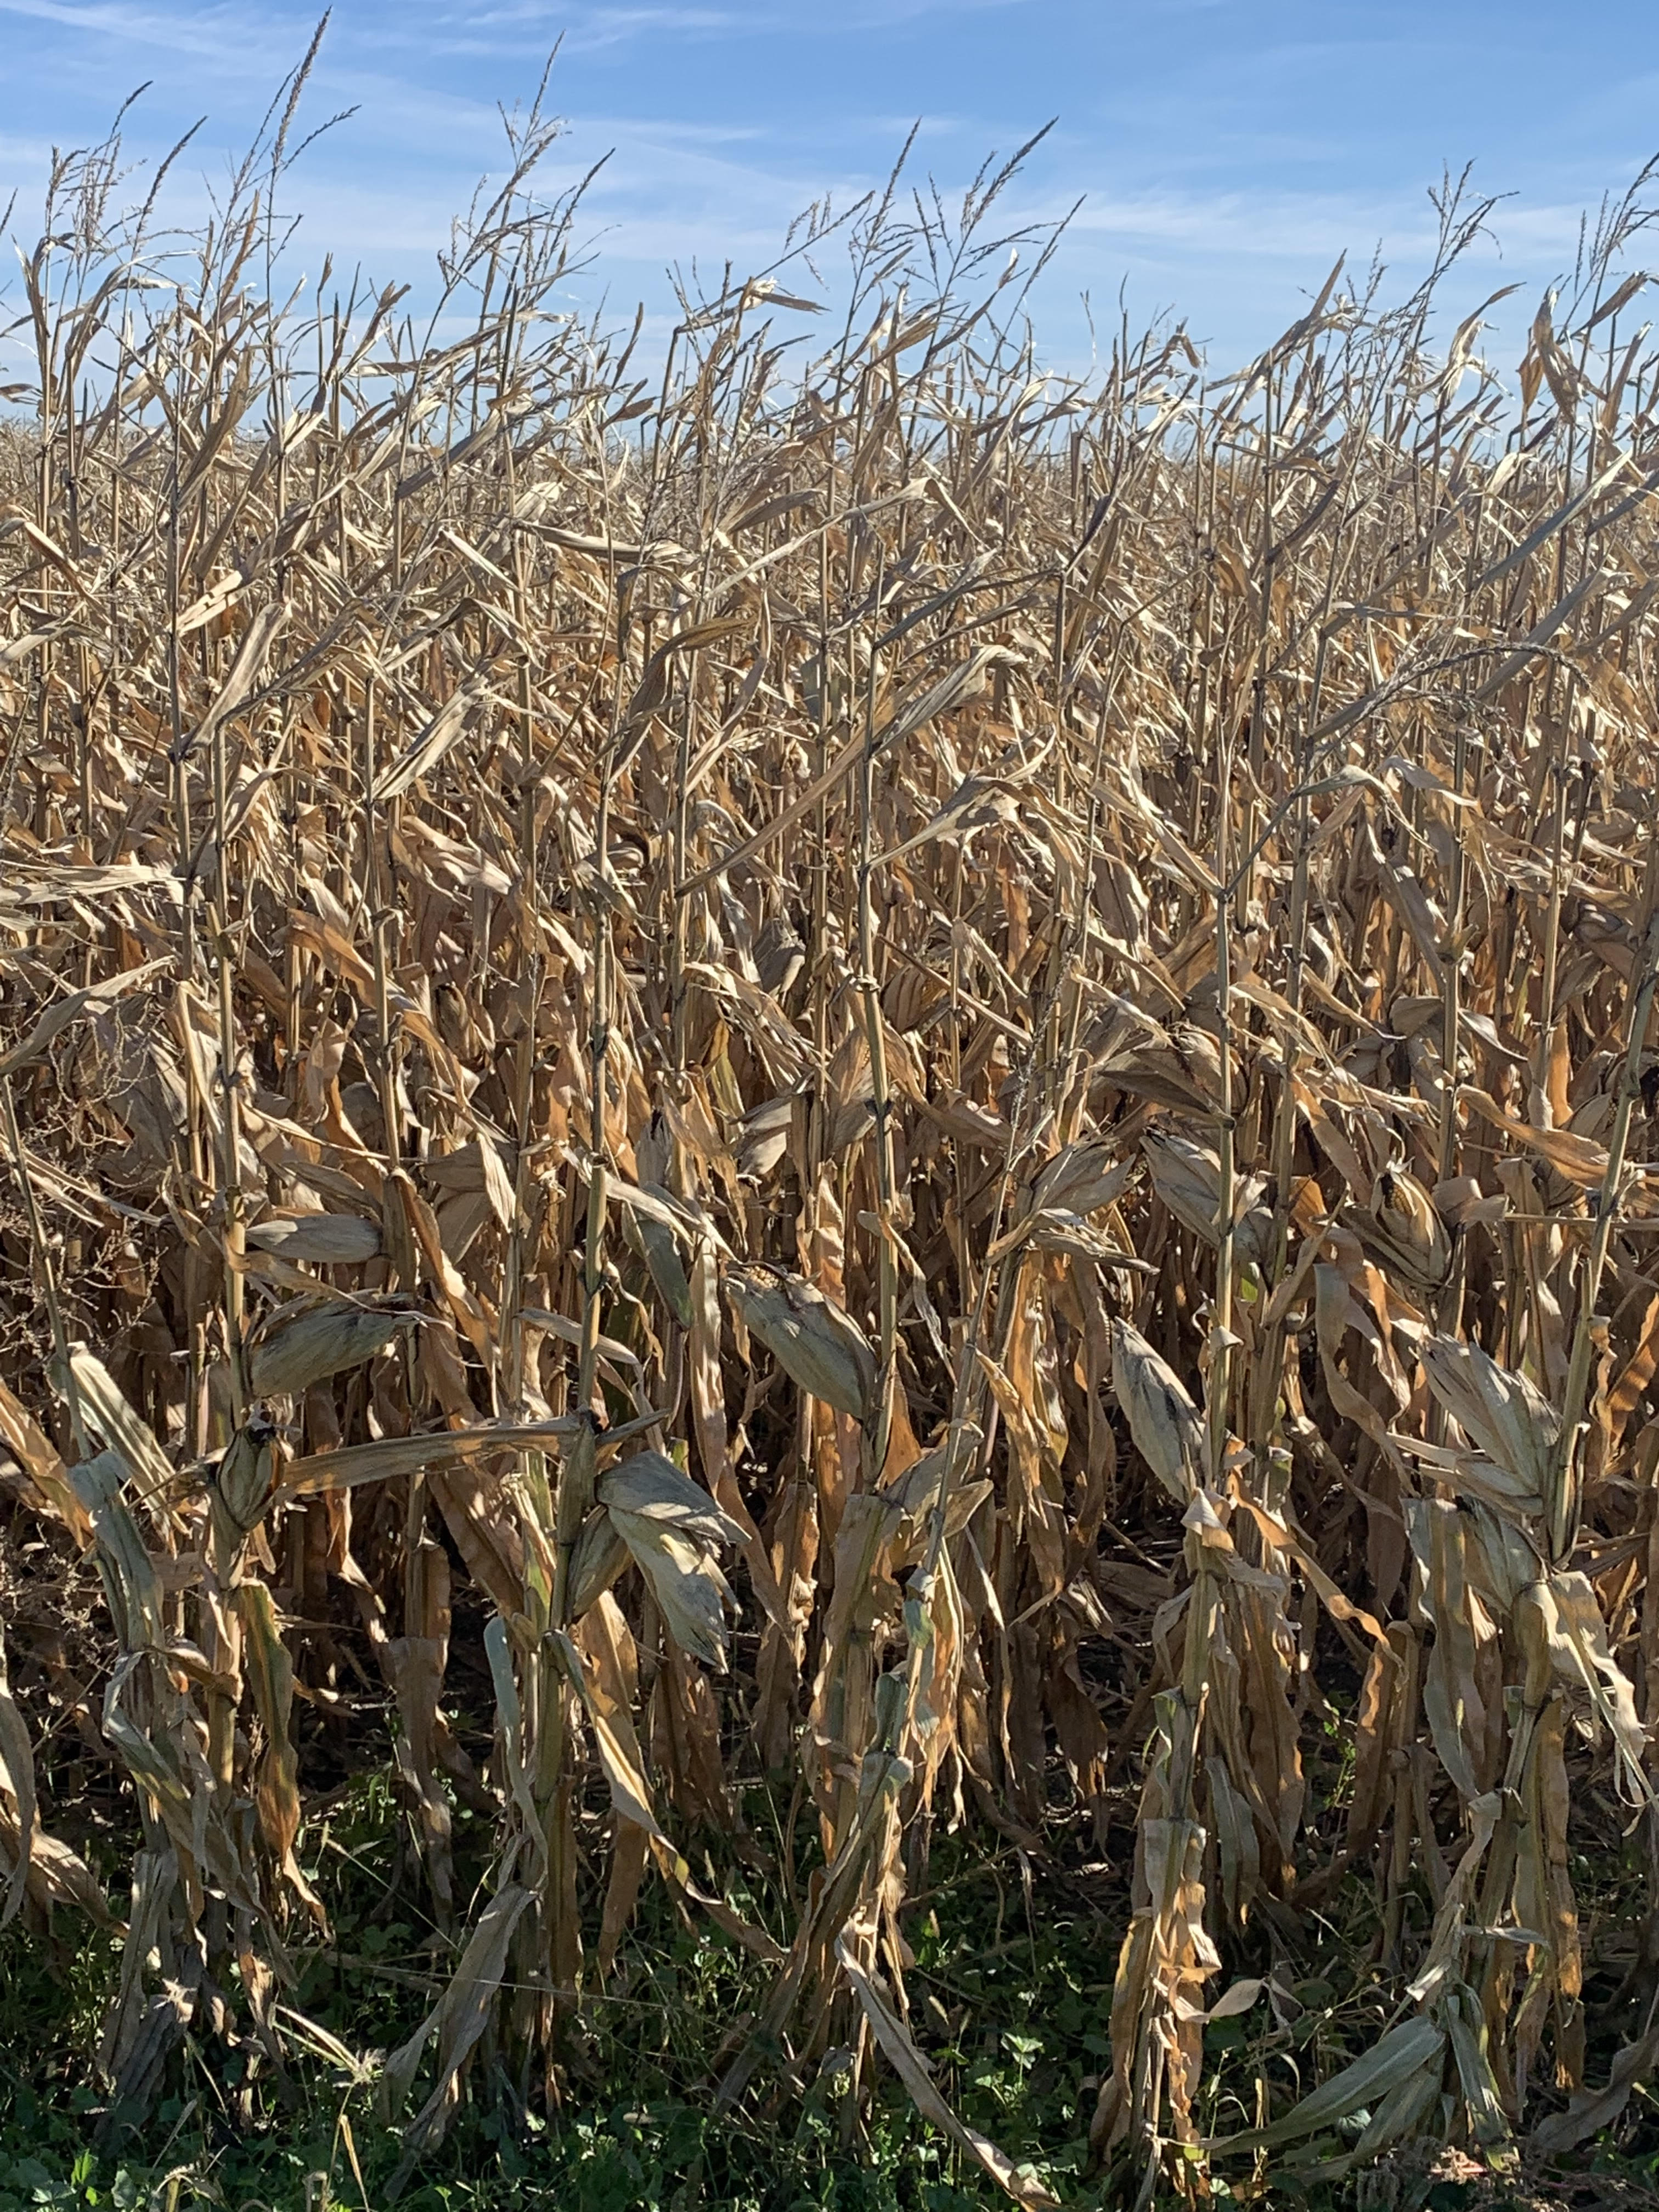 Morning Ag News, October 25, 2021: Farmers finishing up soybeans and working on corn harvest in eastern North Dakota